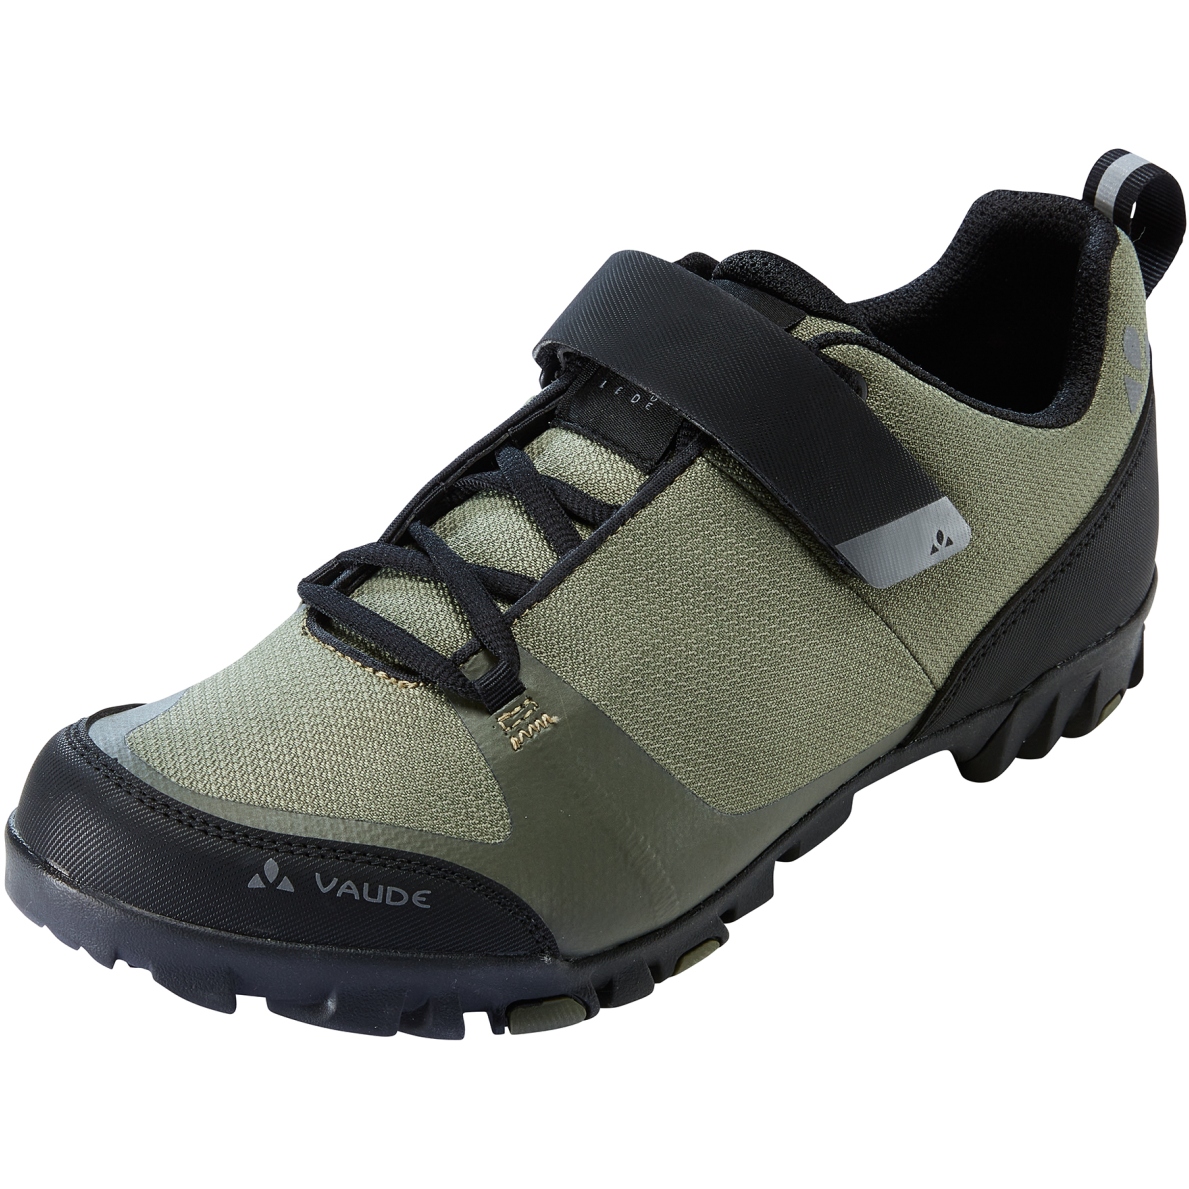 Couvre-chaussures Vaude Palade